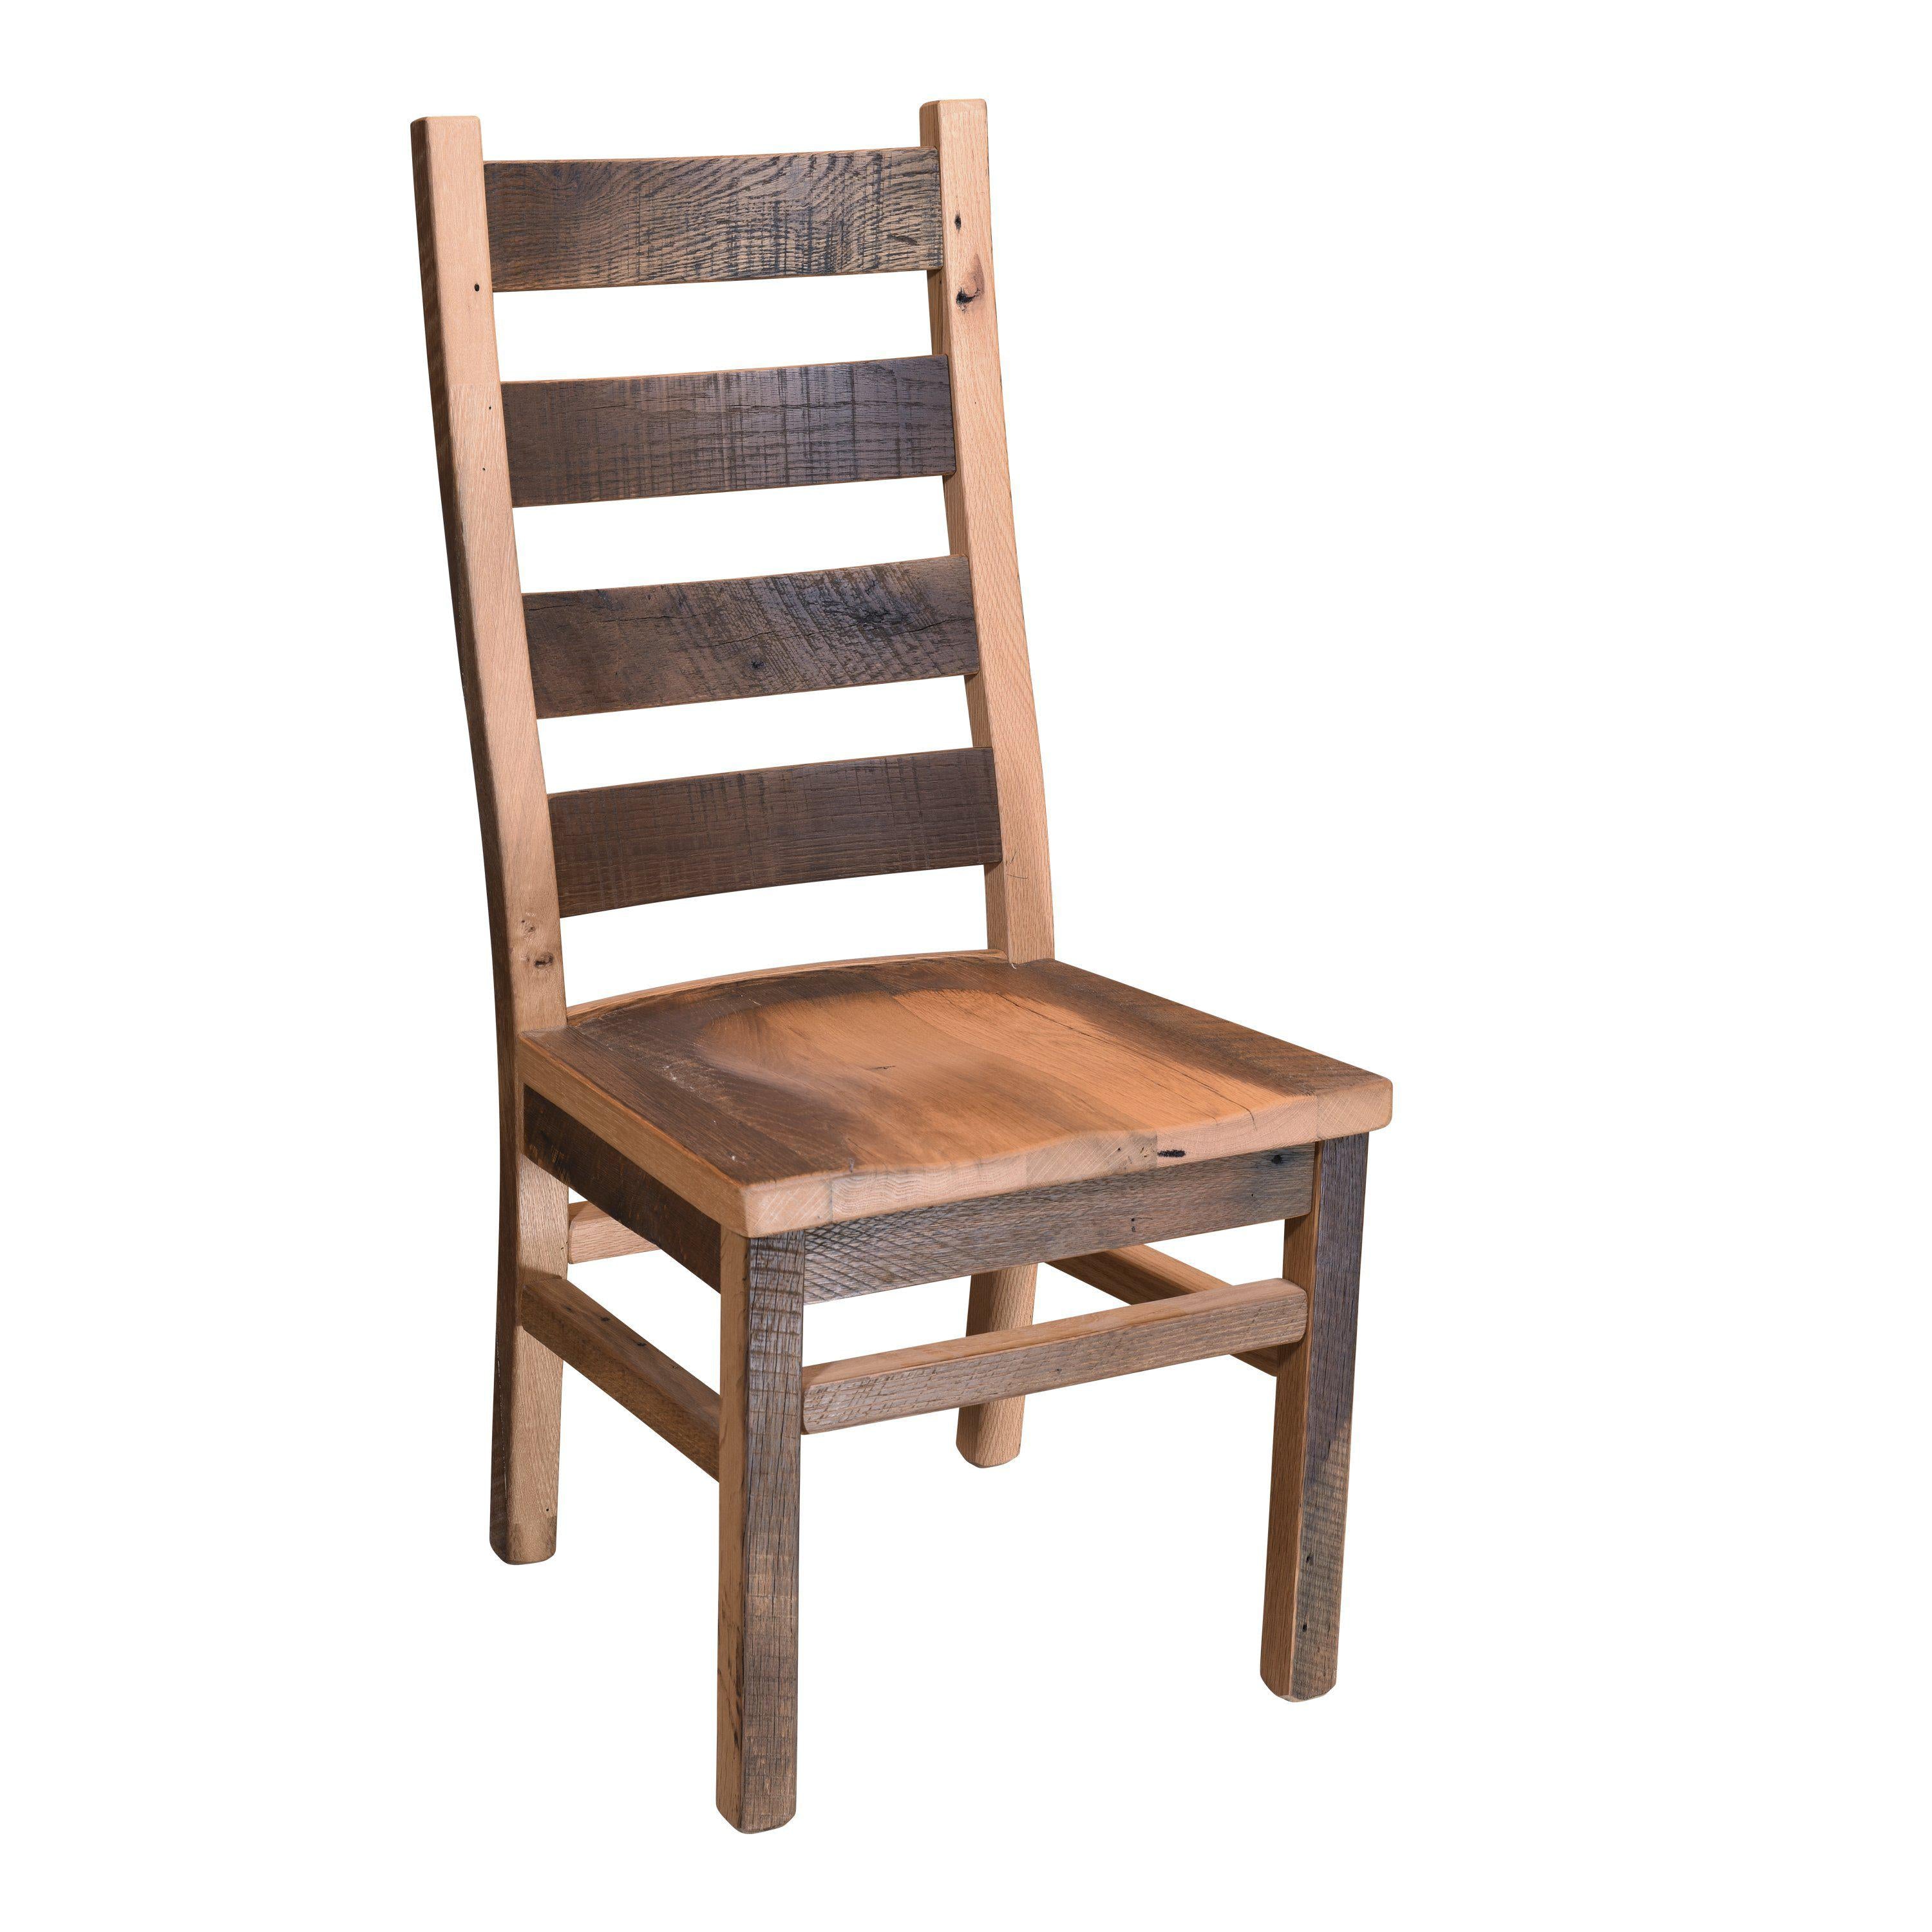 https://theamishhouse.com/cdn/shop/products/ladderback-side-chair-6U0235-lsc_d49a3a03-975e-4d32-86f2-657641324f78.jpg?v=1587931466&width=3000